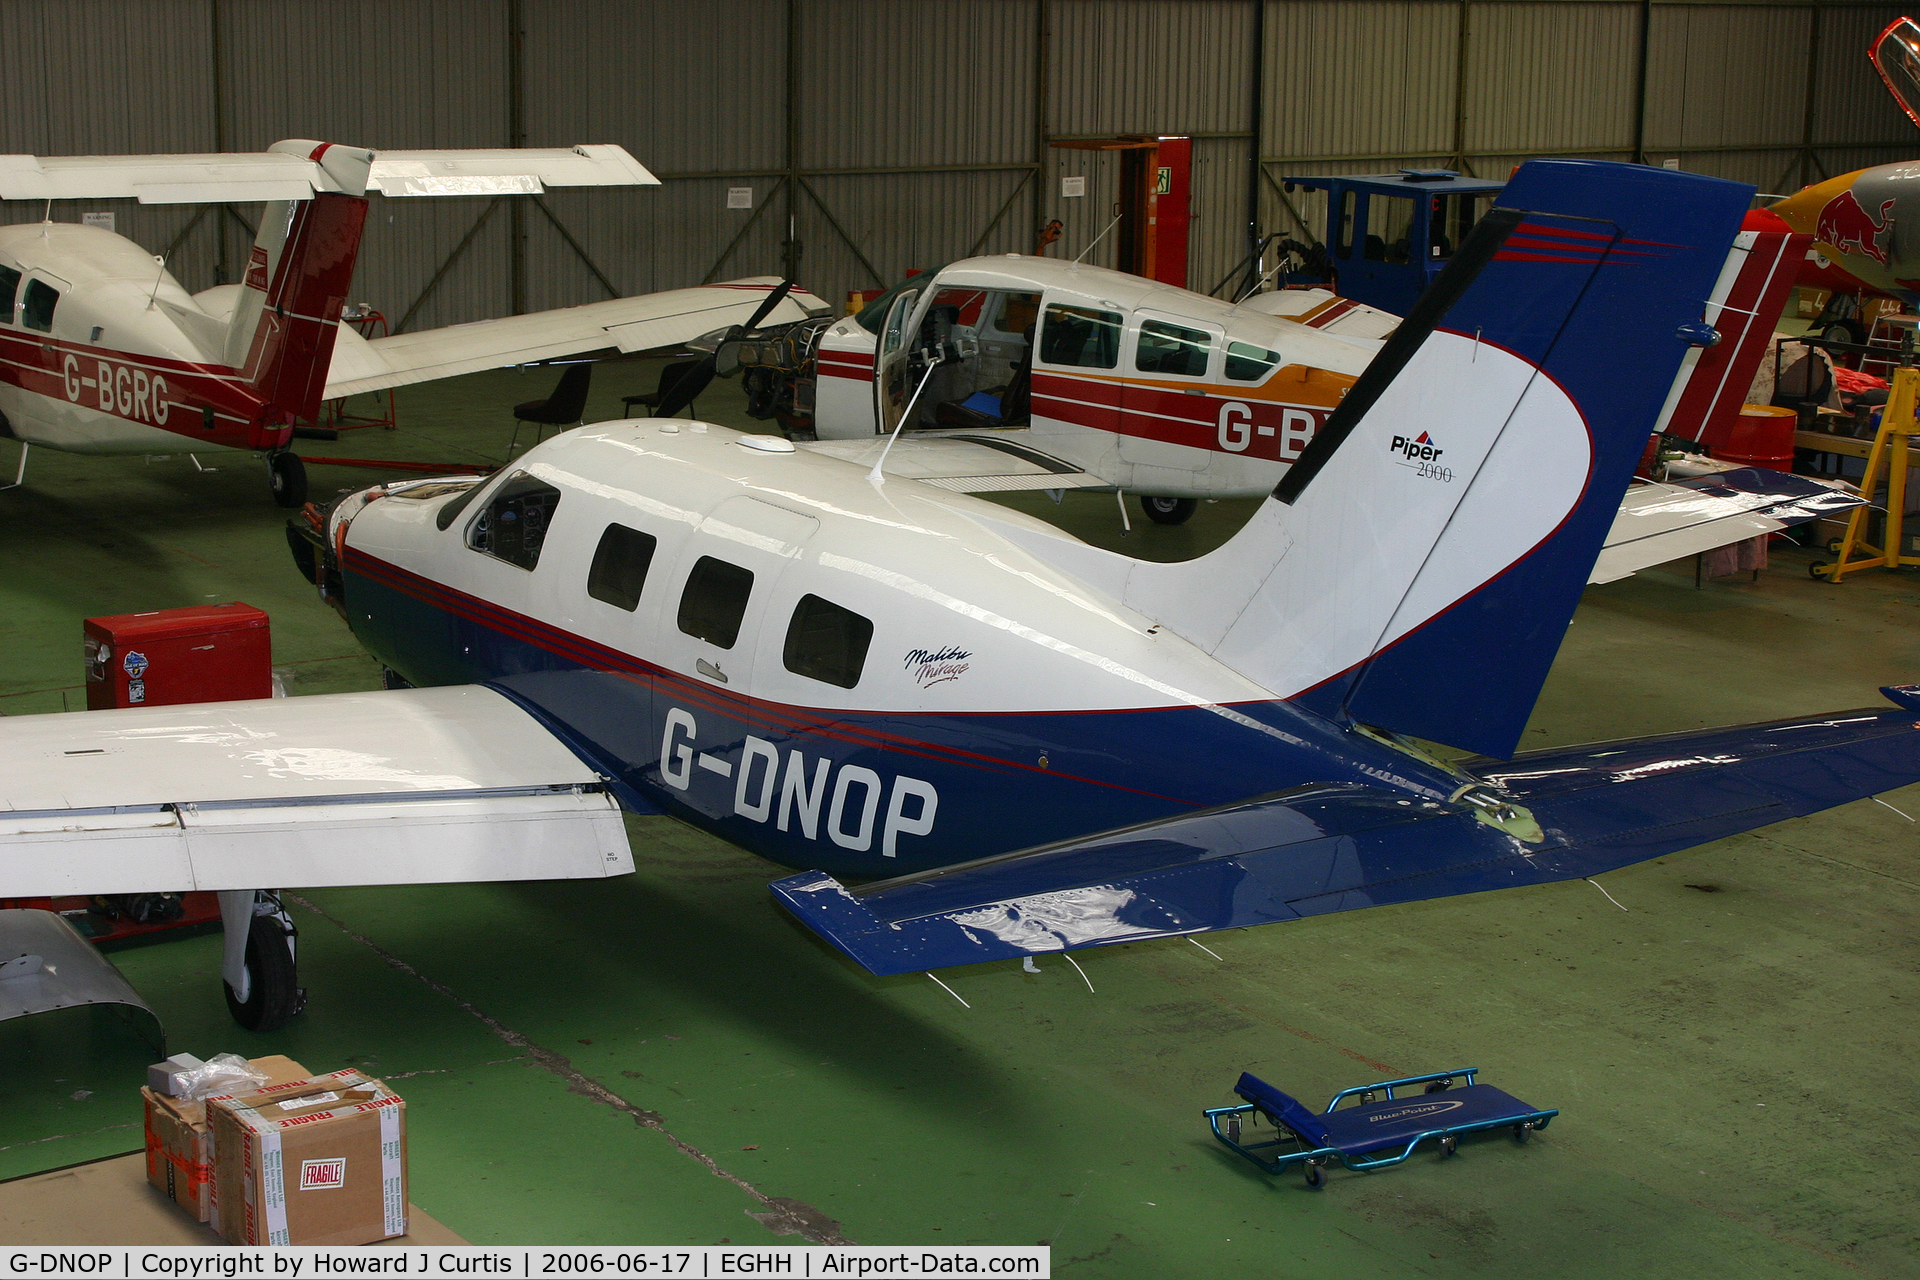 G-DNOP, 2000 Piper PA-46-350P Malibu Mirage C/N 4636303, Privately owned. Inside the Worldwide hangar.